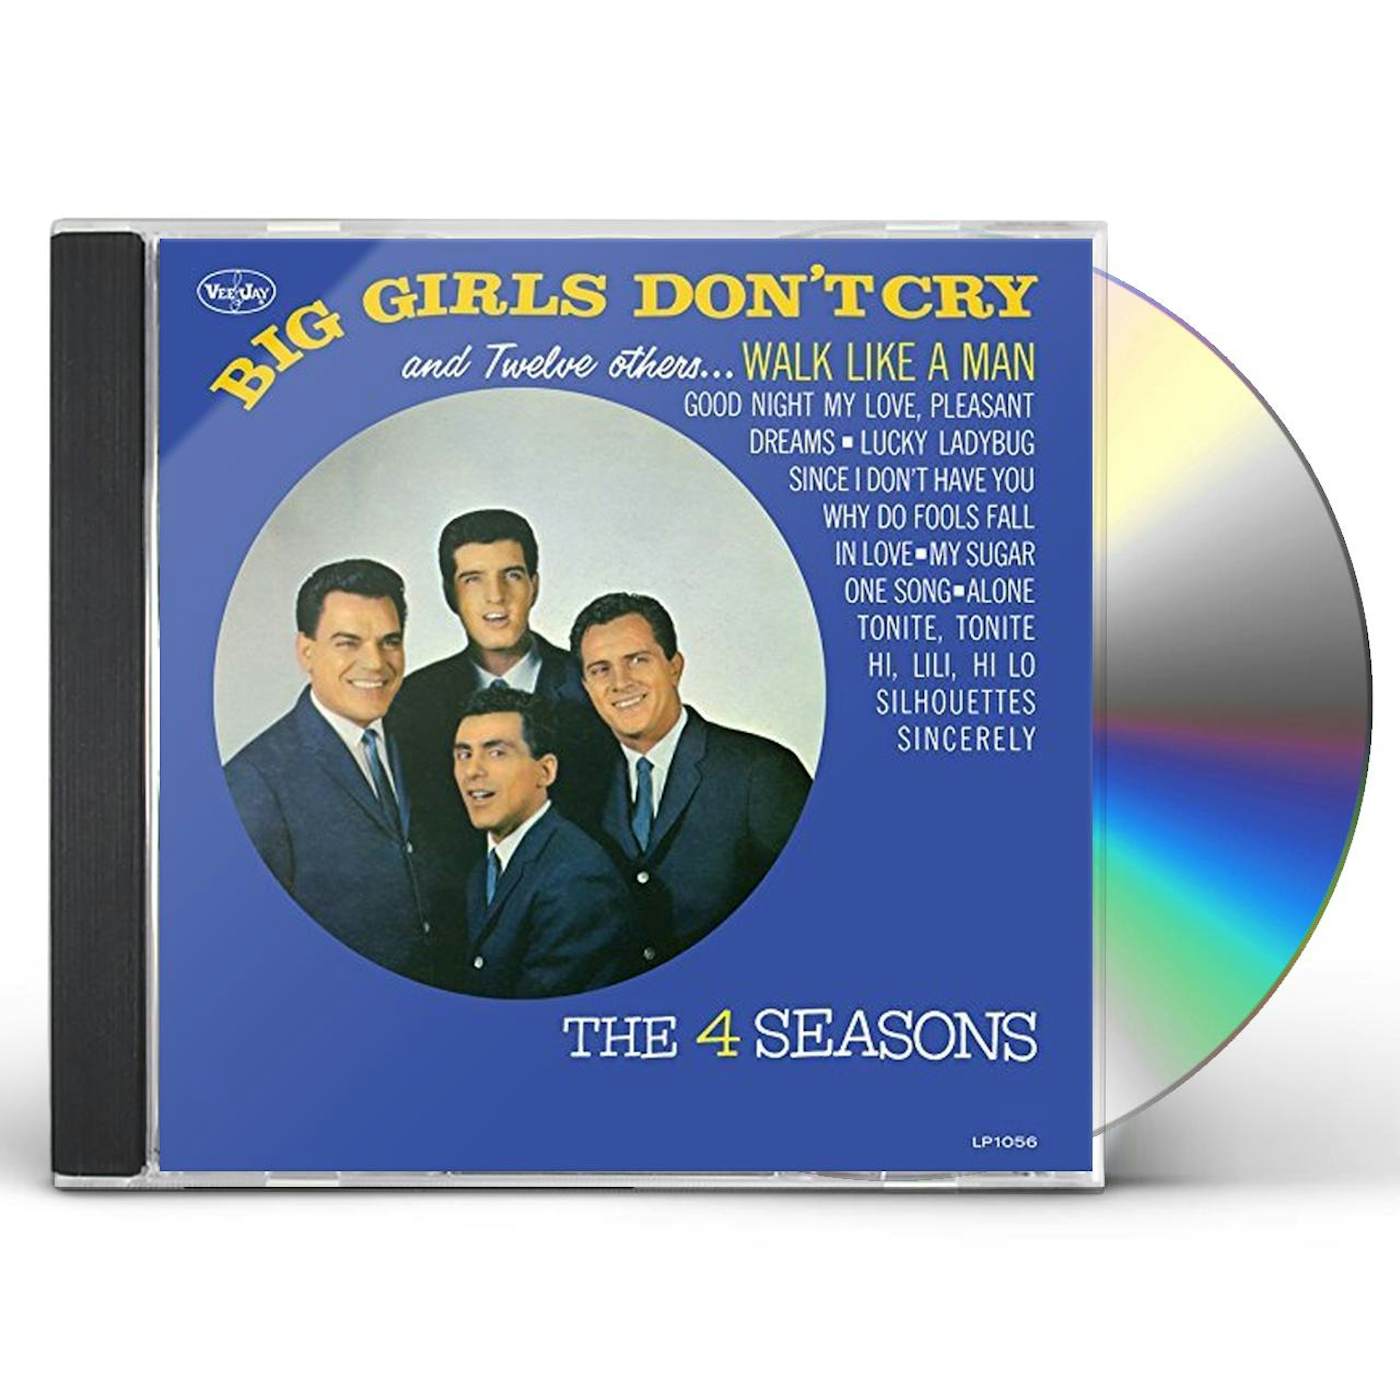 Four Seasons BIG GIRLS DON'T CRY & TWELVE OTHERS CD